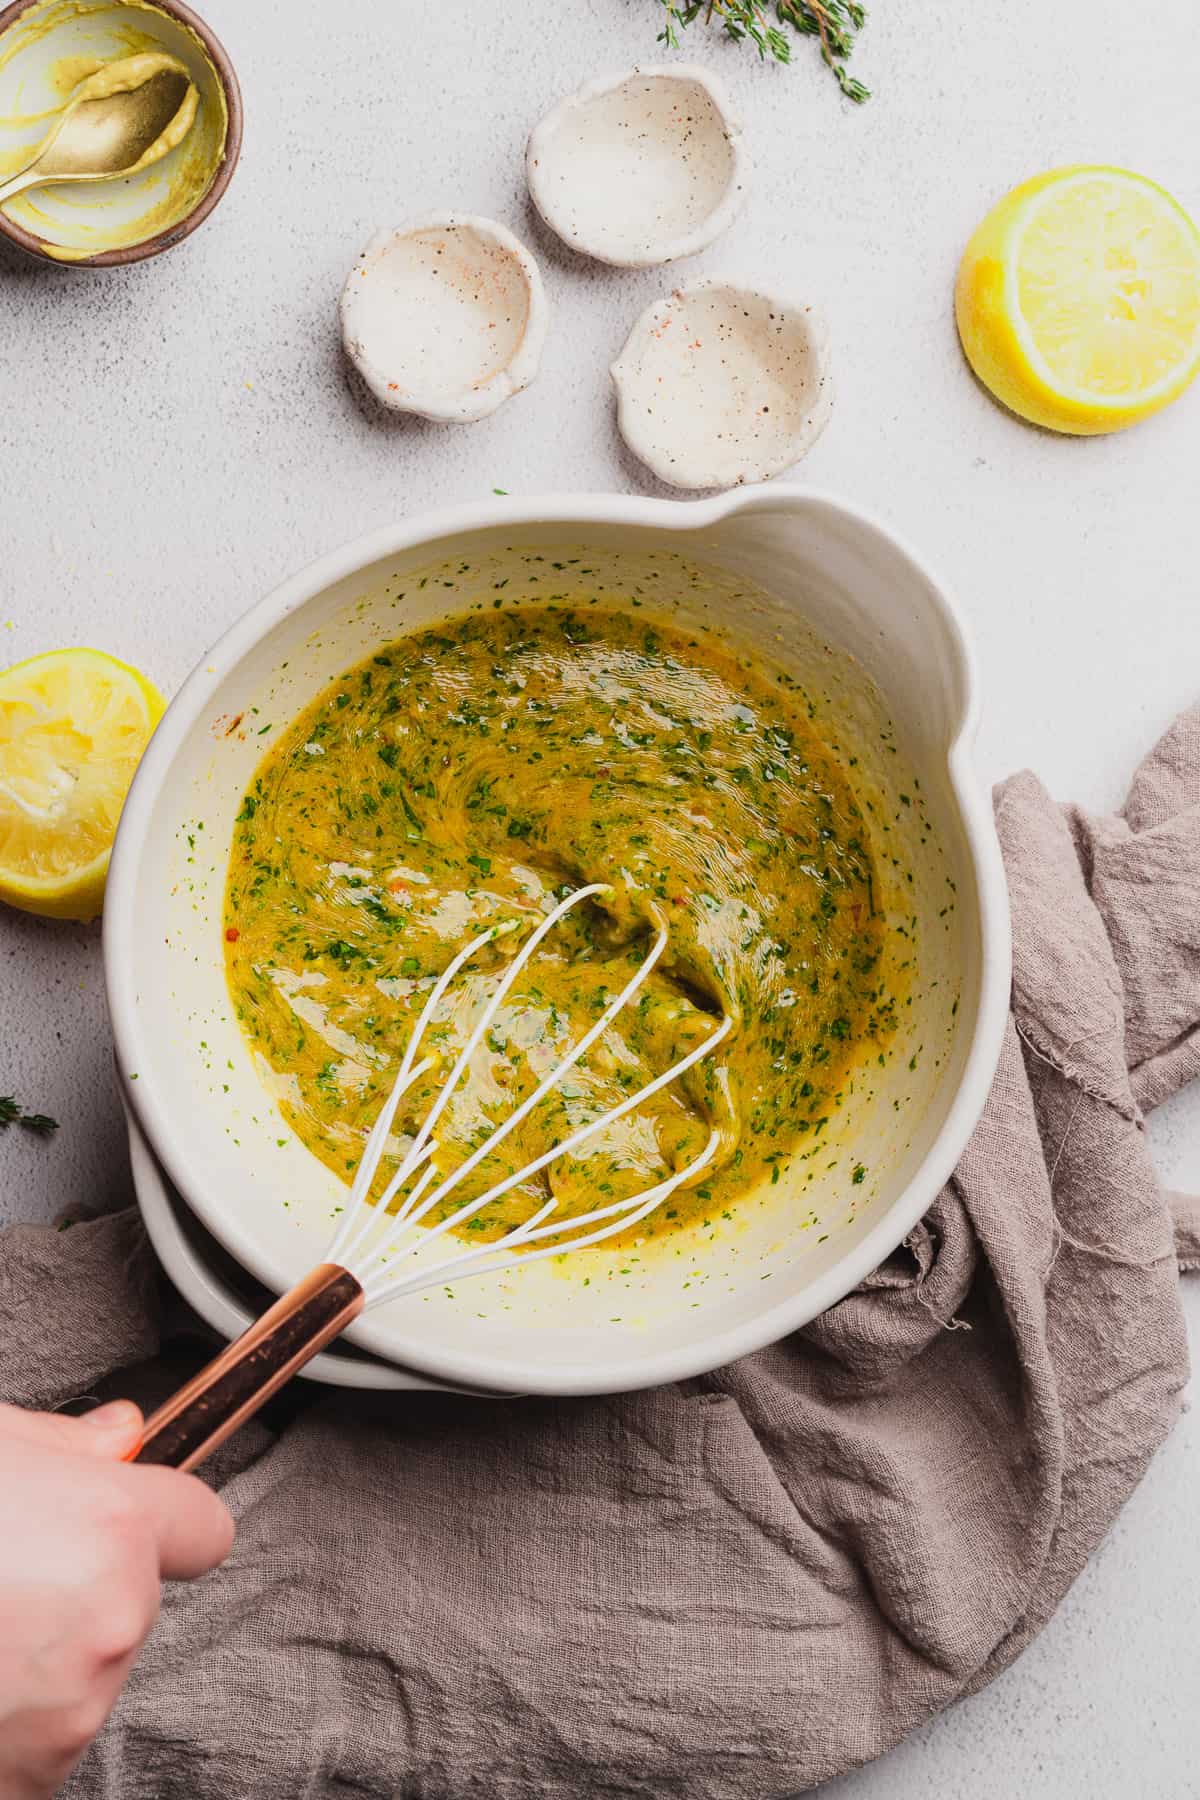 whisking together melted butter with herbs, lemon, spices, shallots, and garlic. 